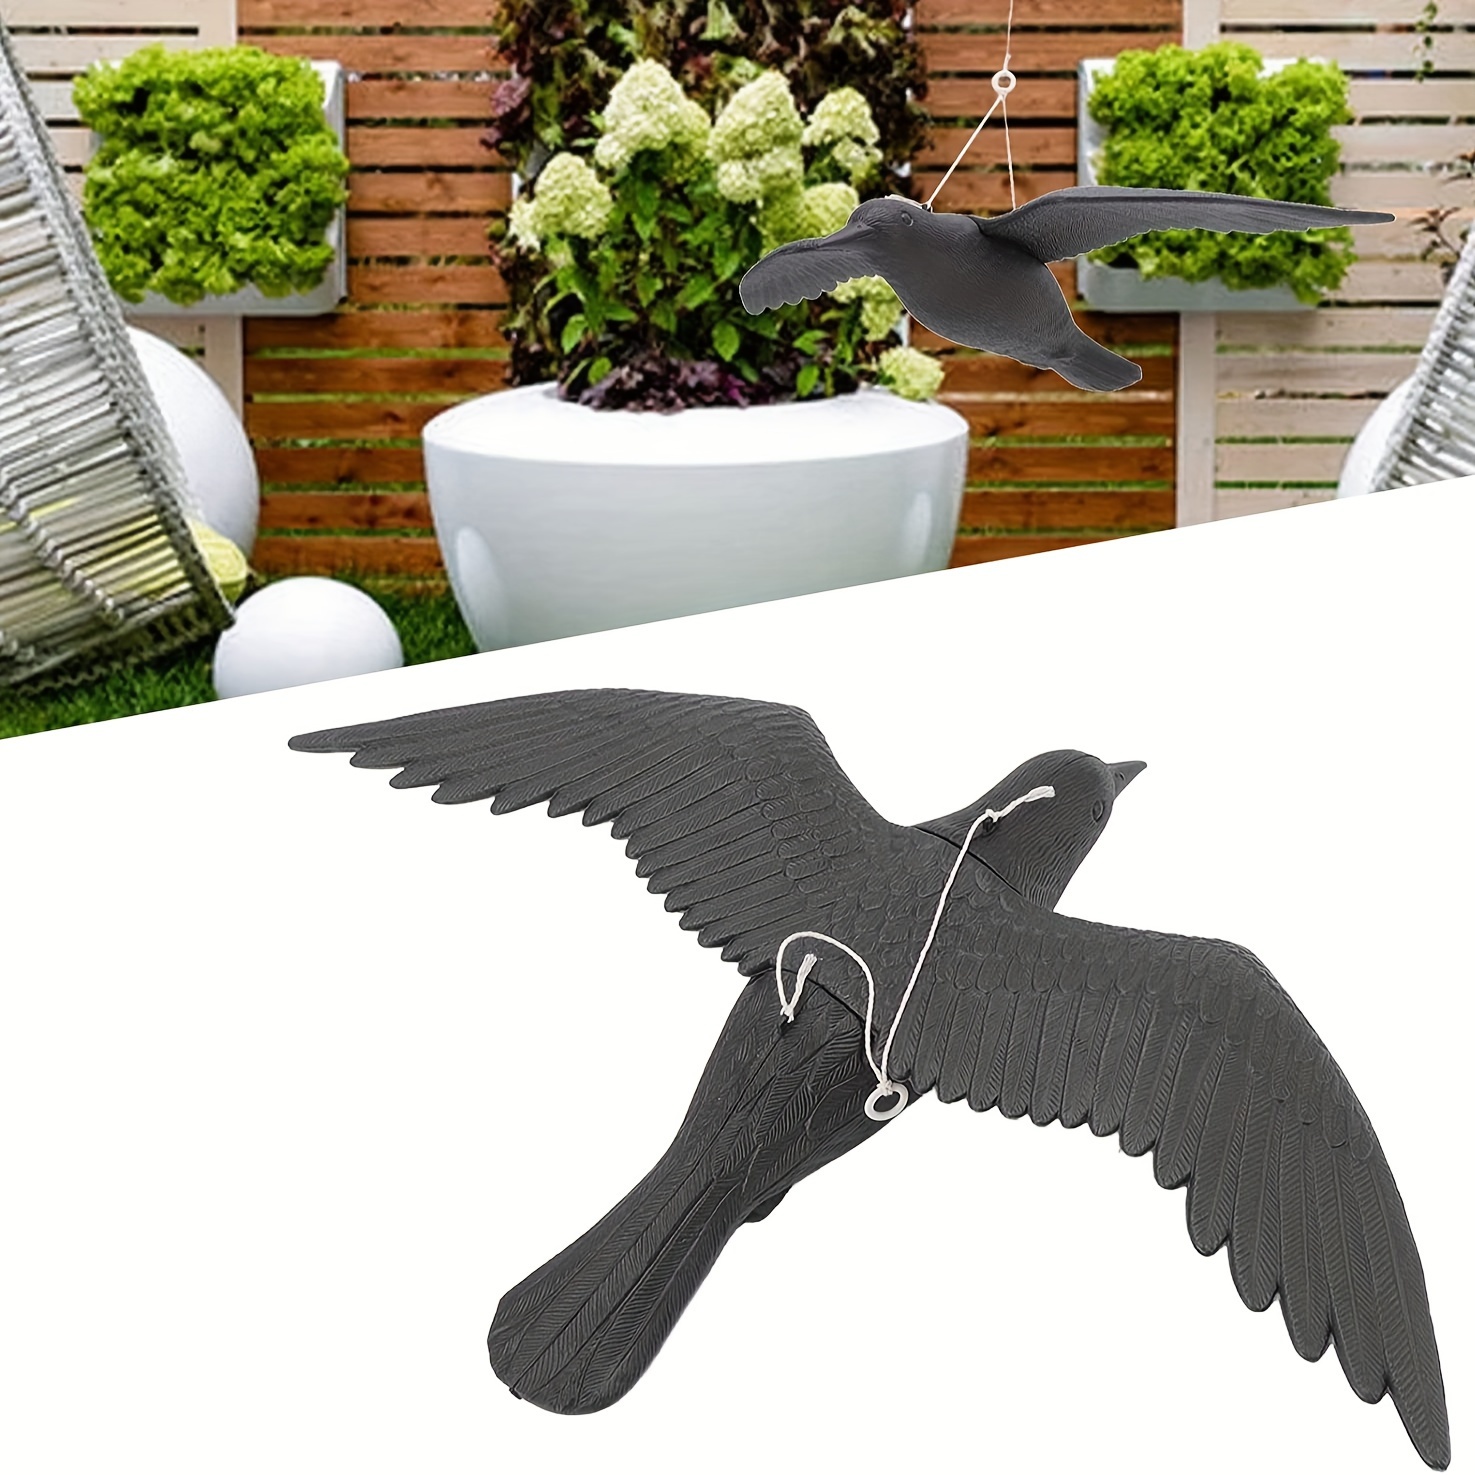 

1pc Crow Decoy, Fake Crow Decoy For Attracting Crows, Hunting, Scaring Birds, Halloween Decoration For Yard, Garden, Deck, Patio